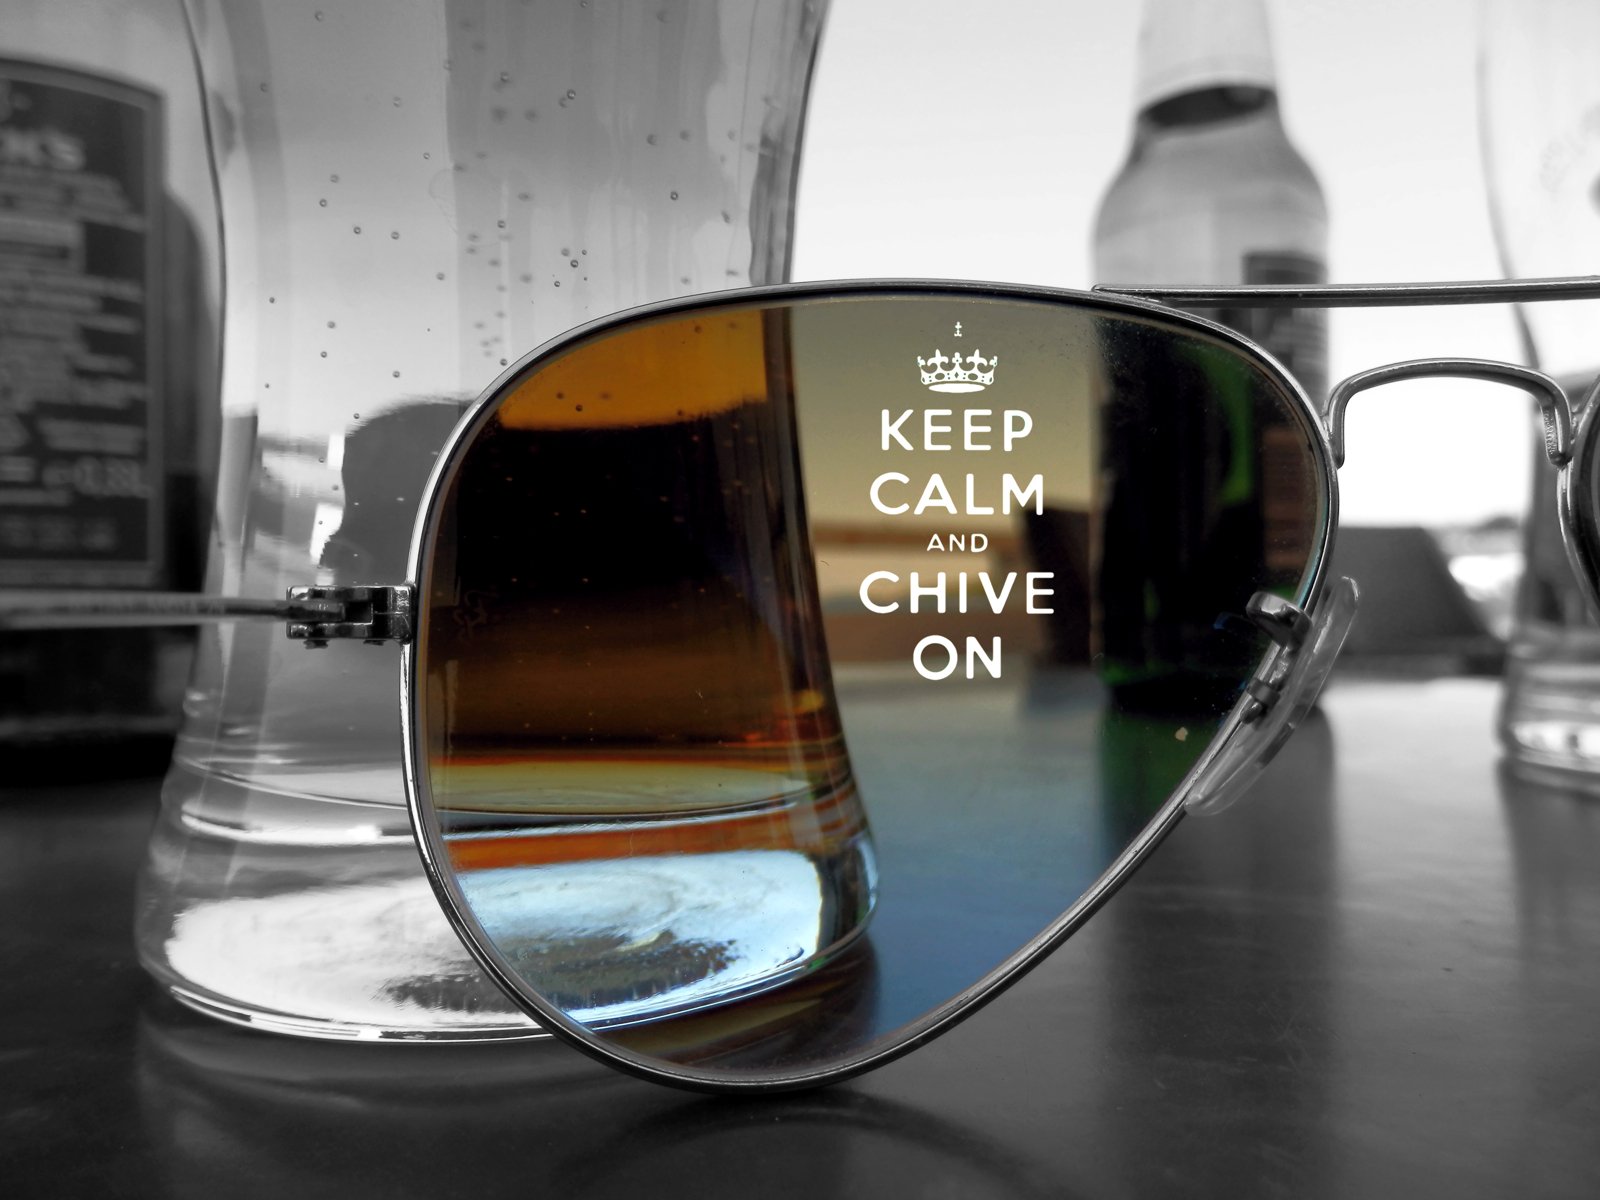 Awesome desktop wallpapersthechive theCHIVE